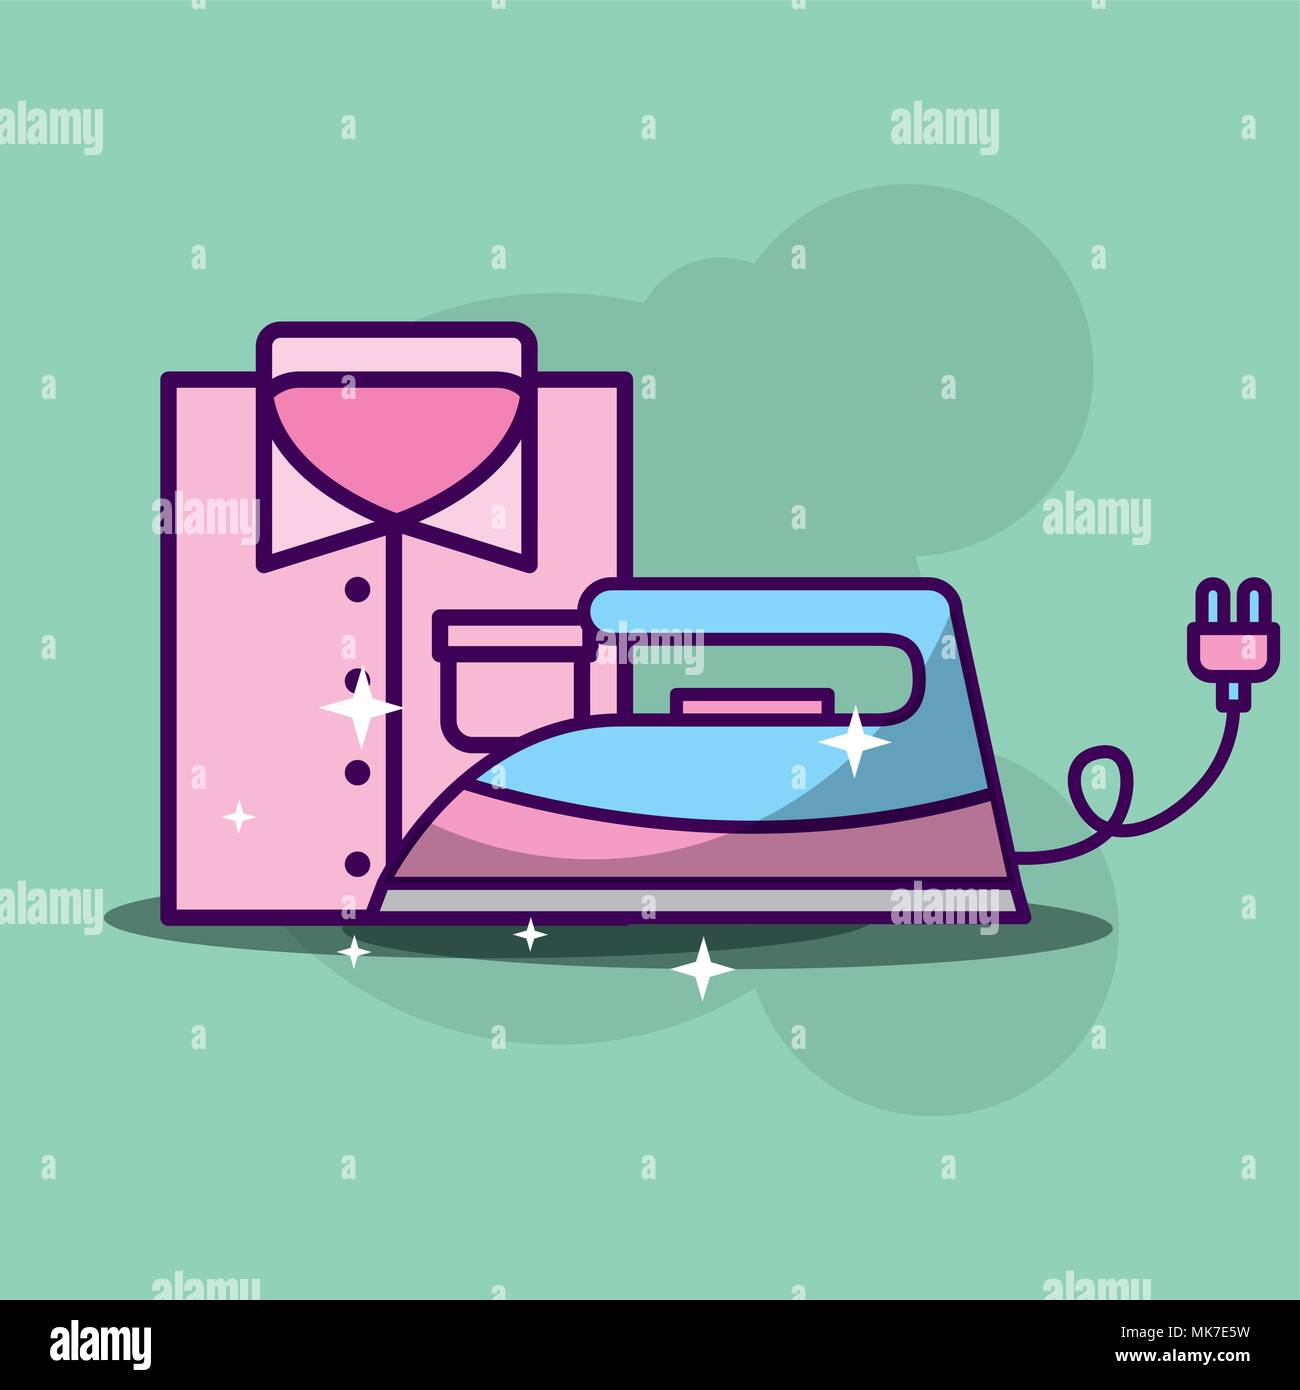 laundry cleaning steaming ironing with shirt vector illustration Stock Vector